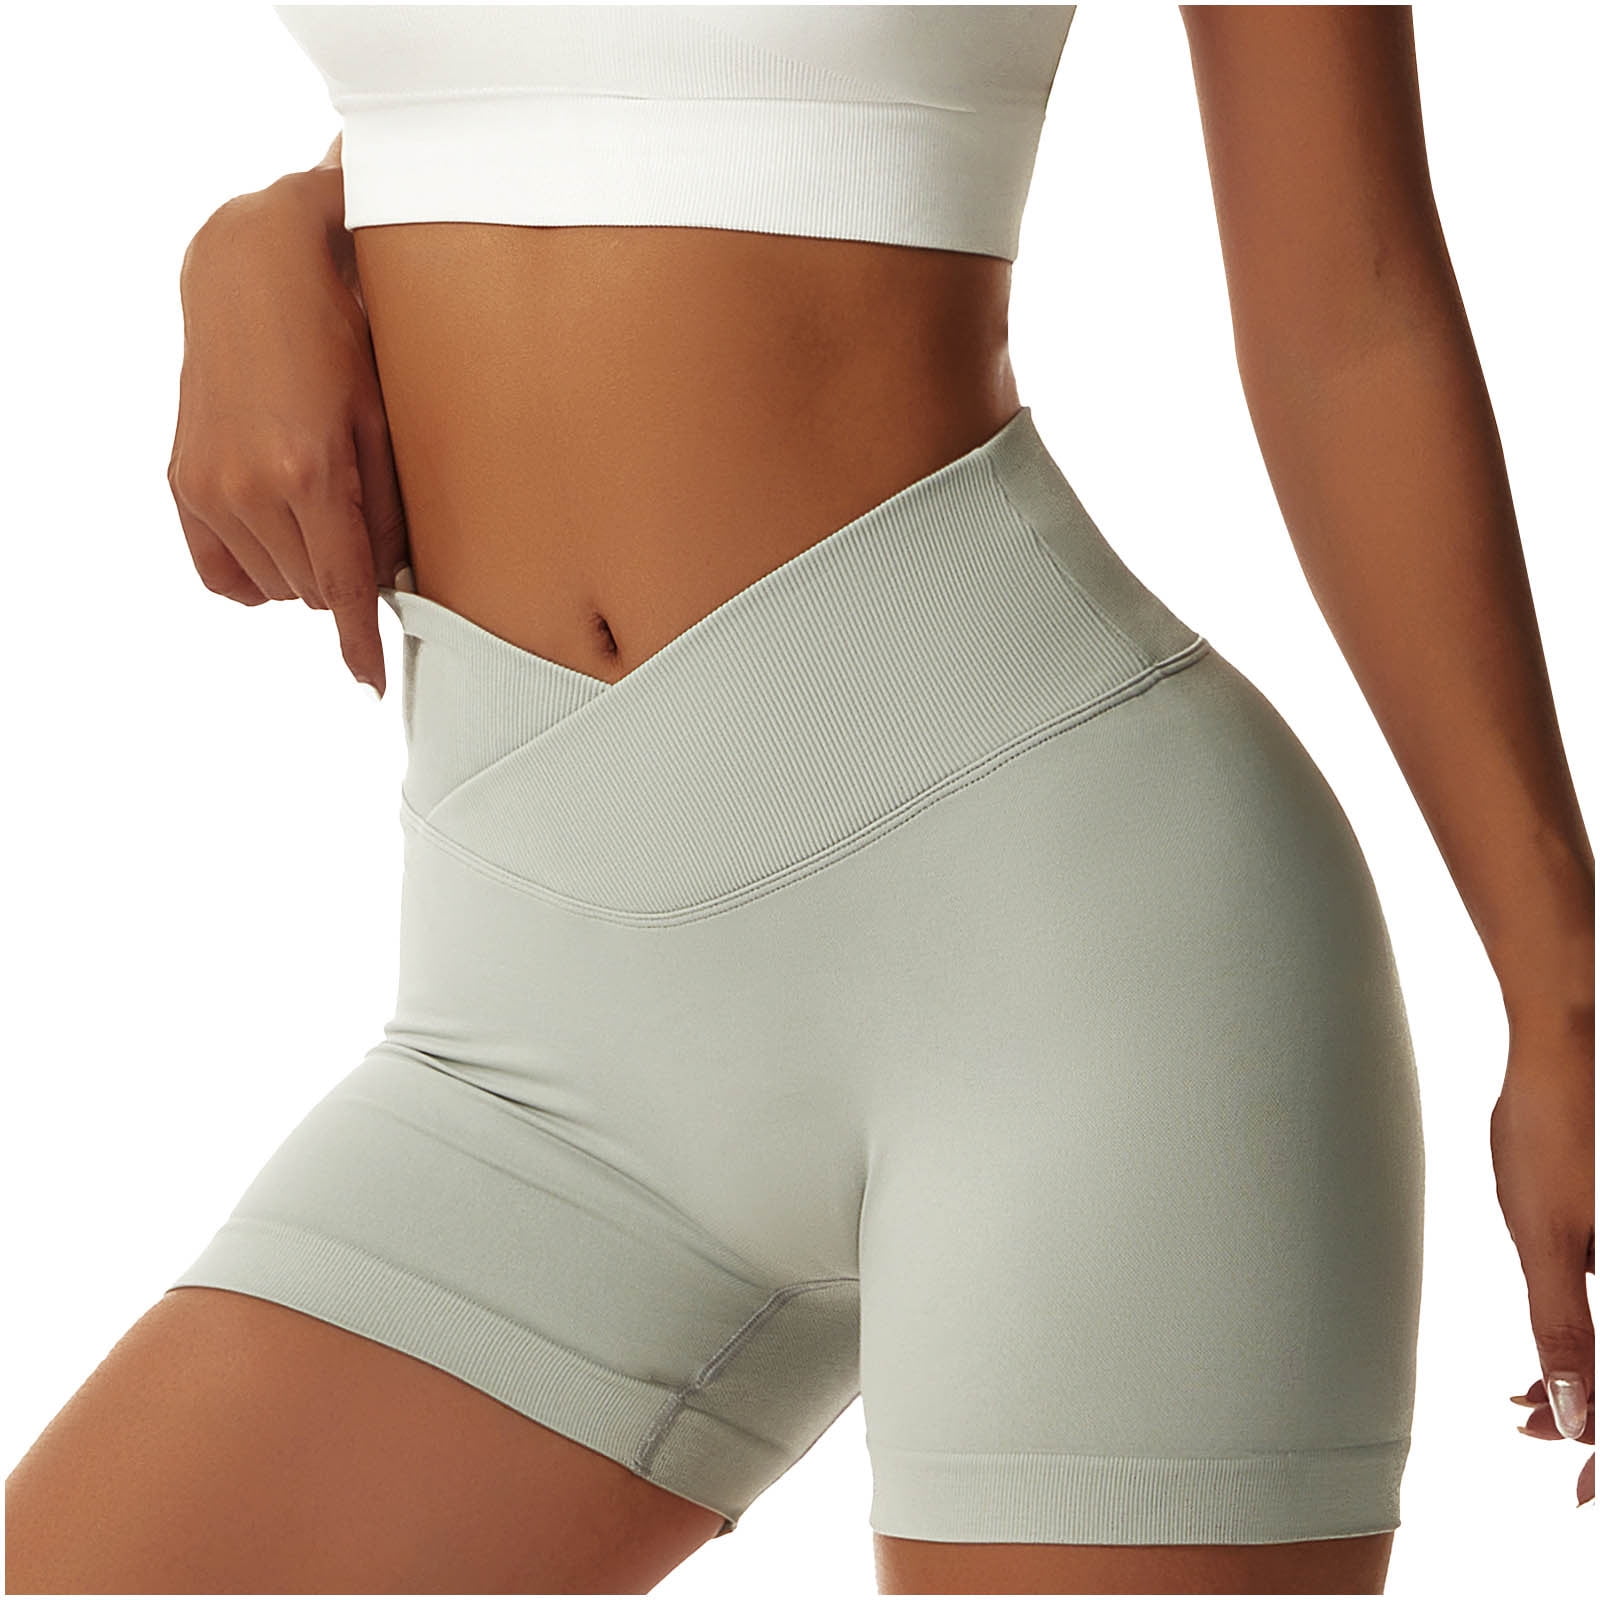 Compression shorts for women – Women’s Shorts for Sports